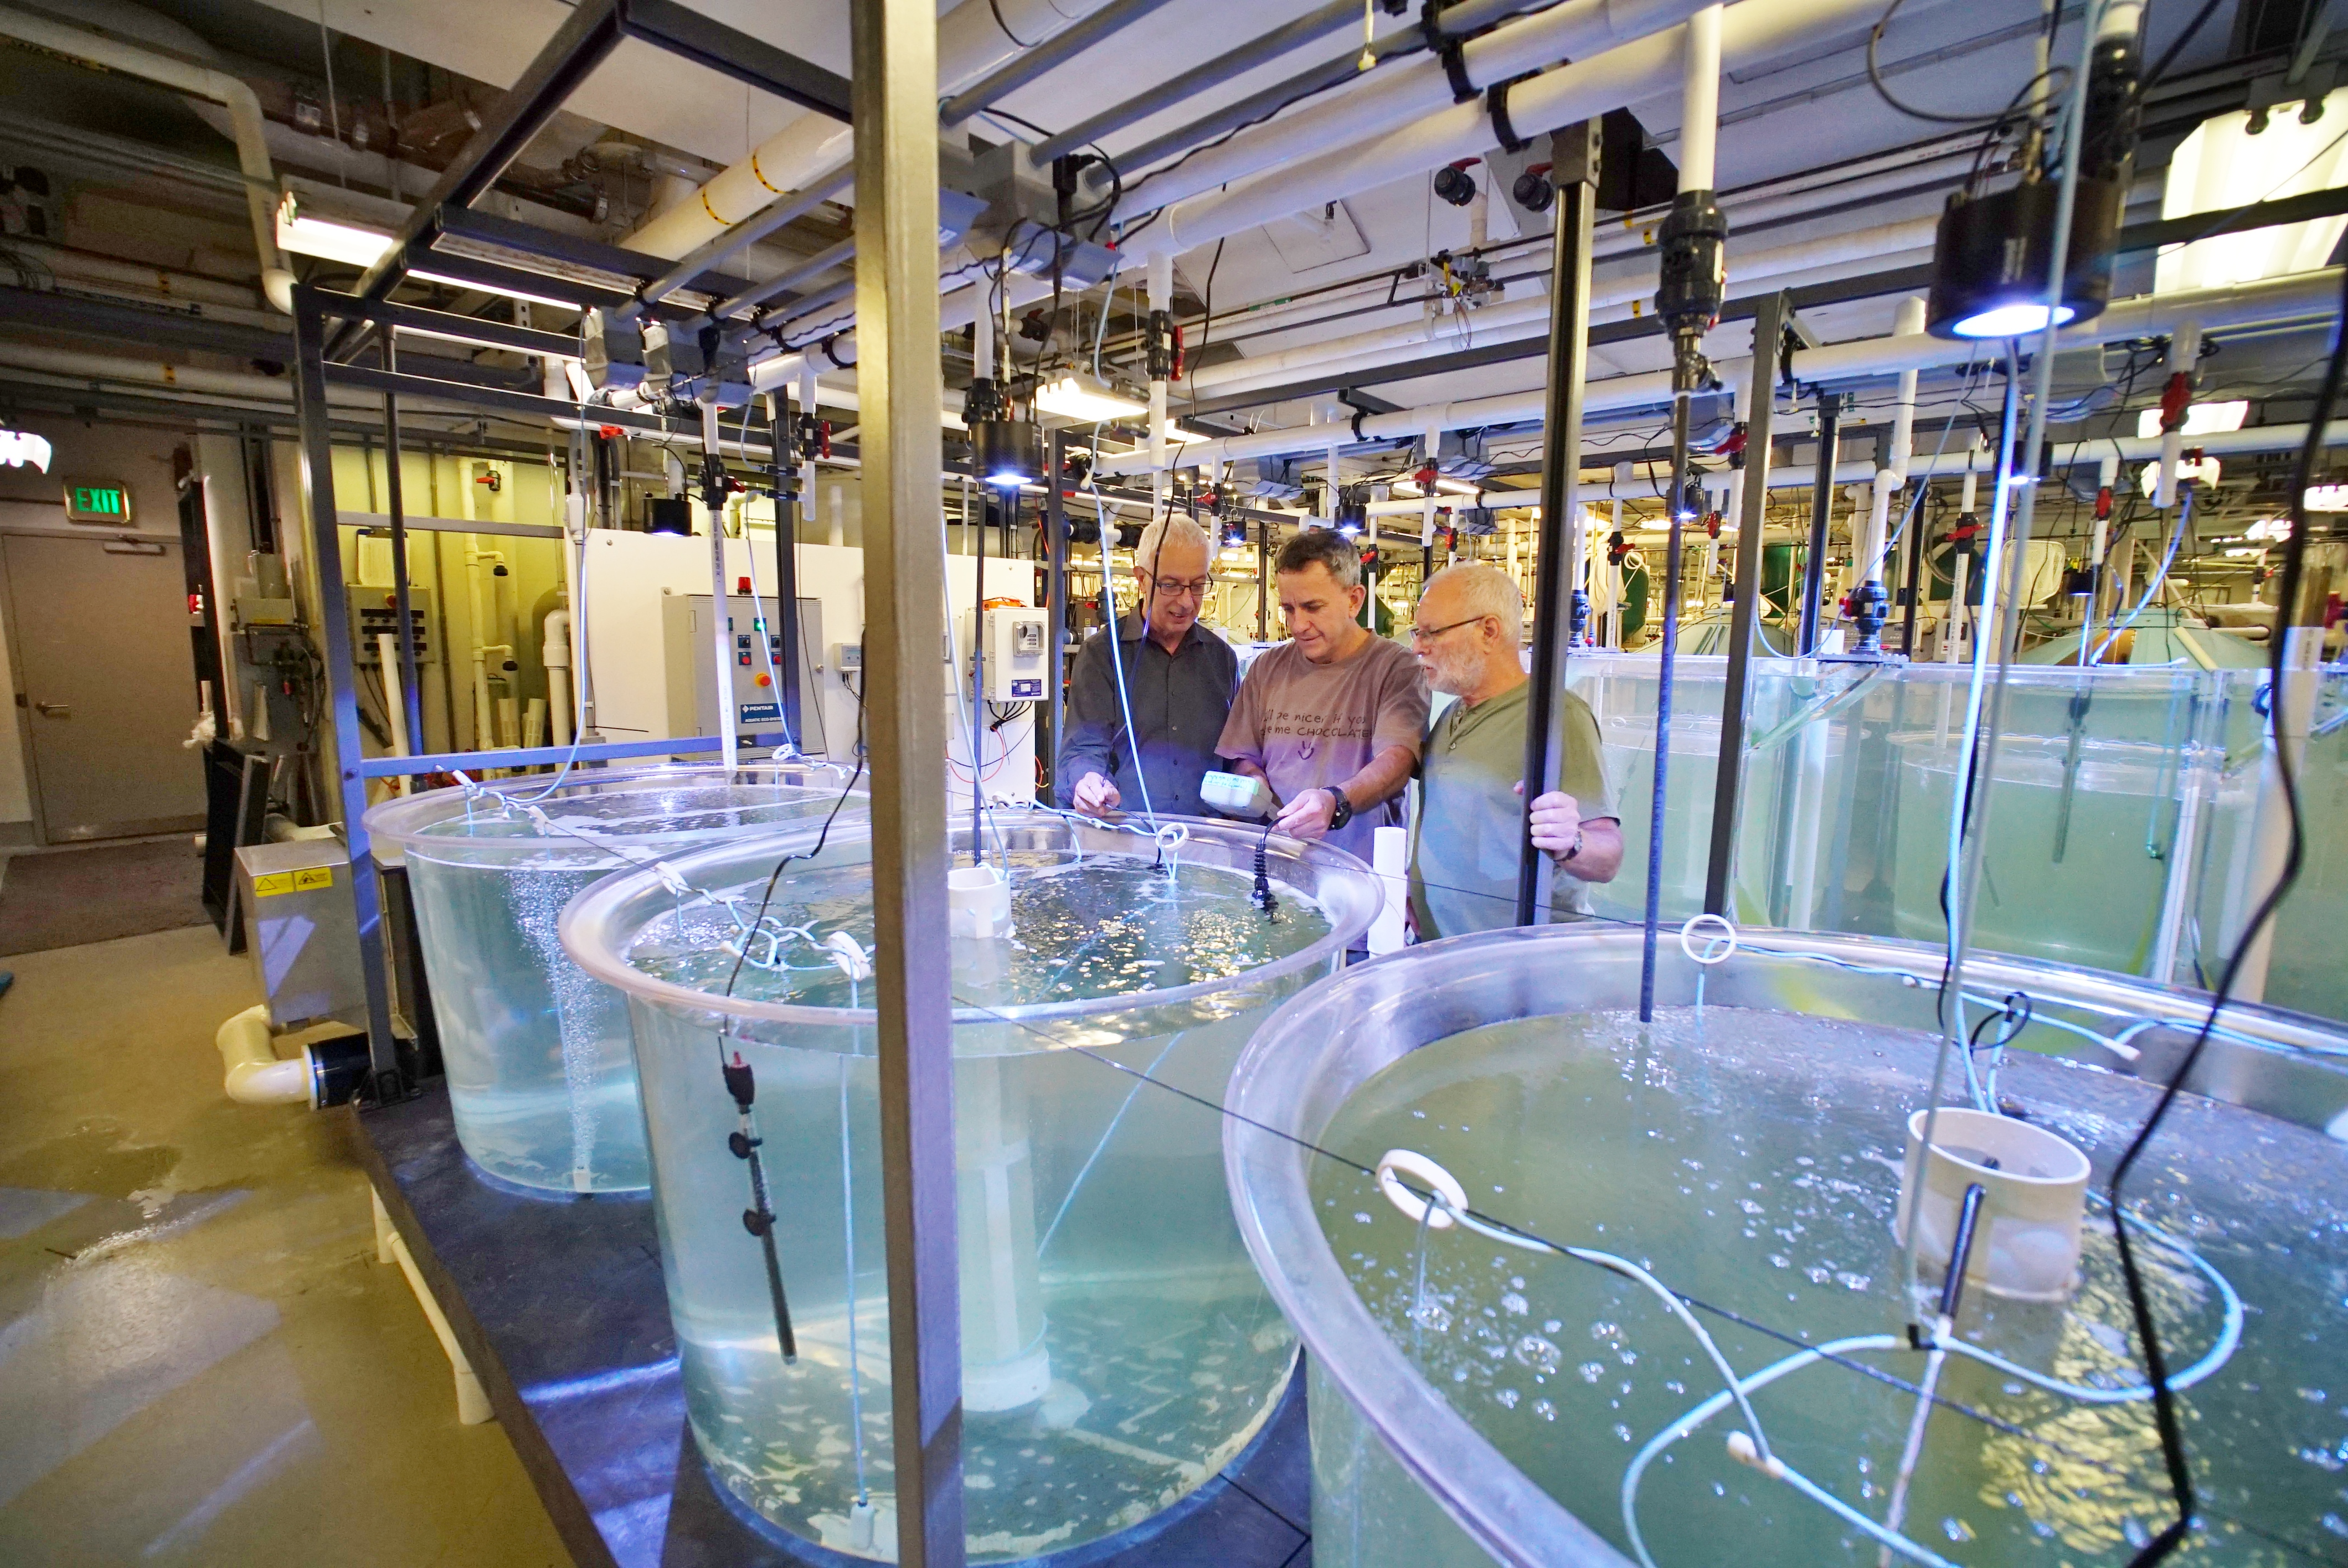 Jorge Gomezjurado and two other scientists stand at a tank in the Aquaculture Research Center